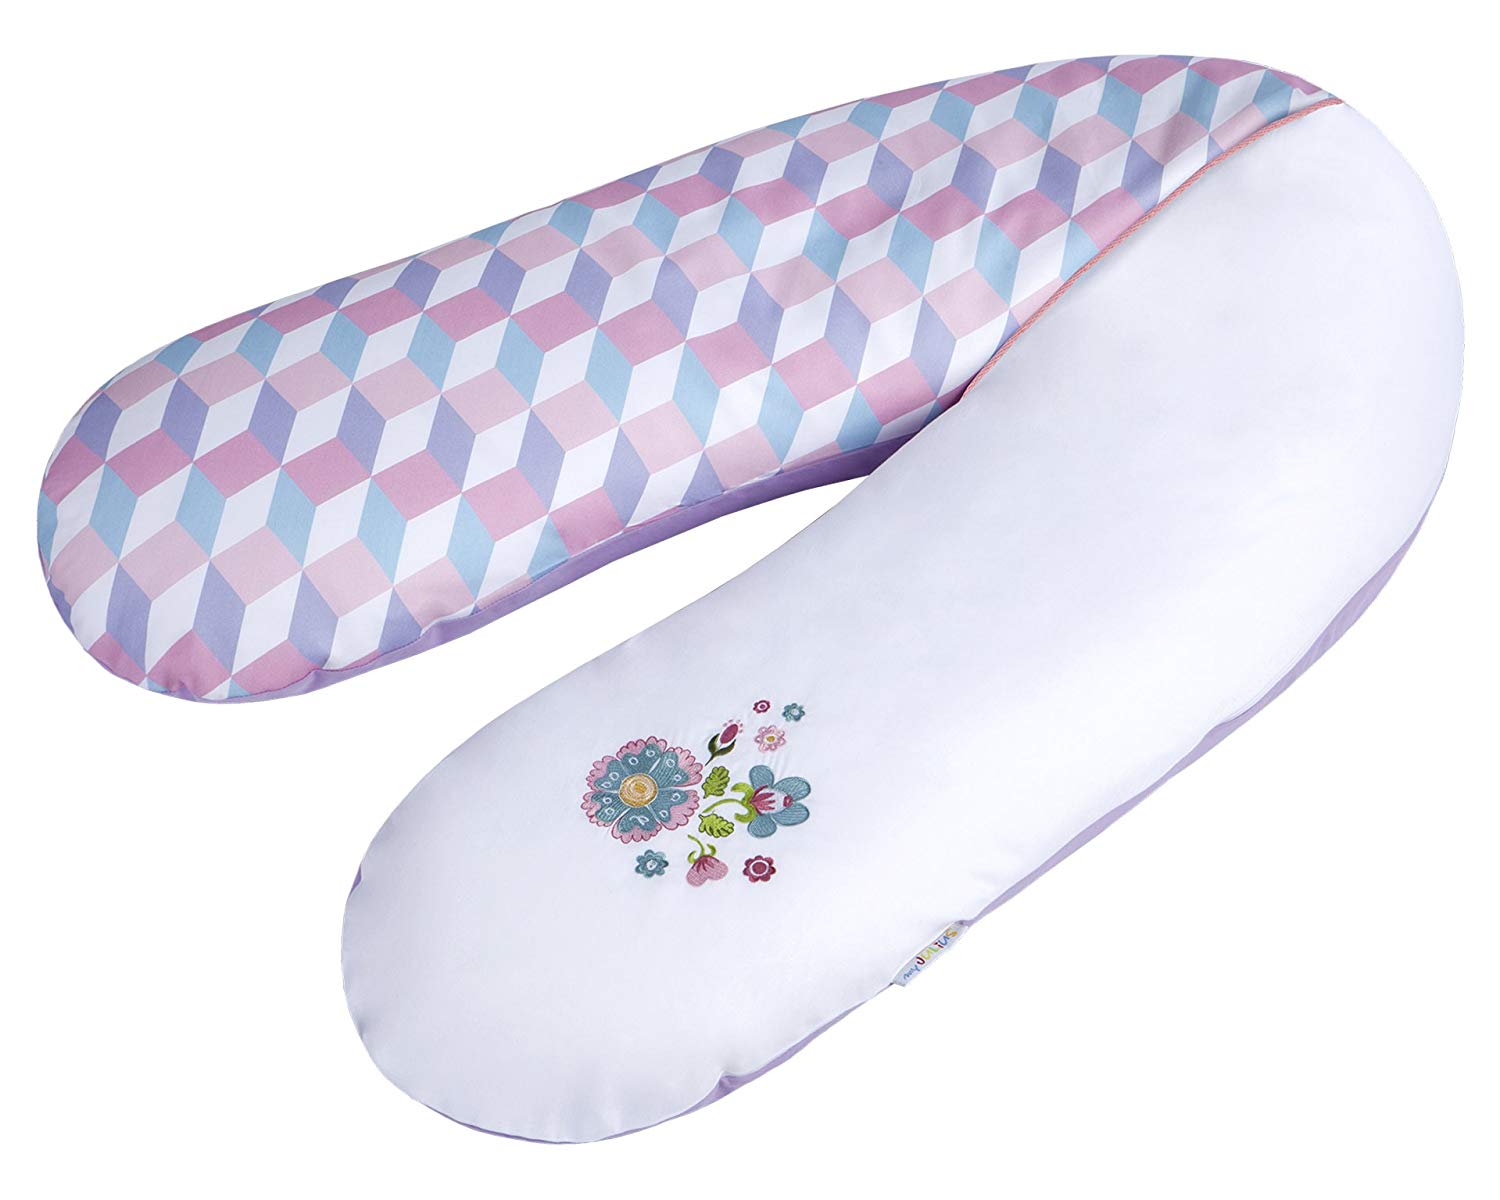 My Julius 4670516630 Nursing Pillow with Pearl Filling 190 cm with Appliqué Sugar Baby